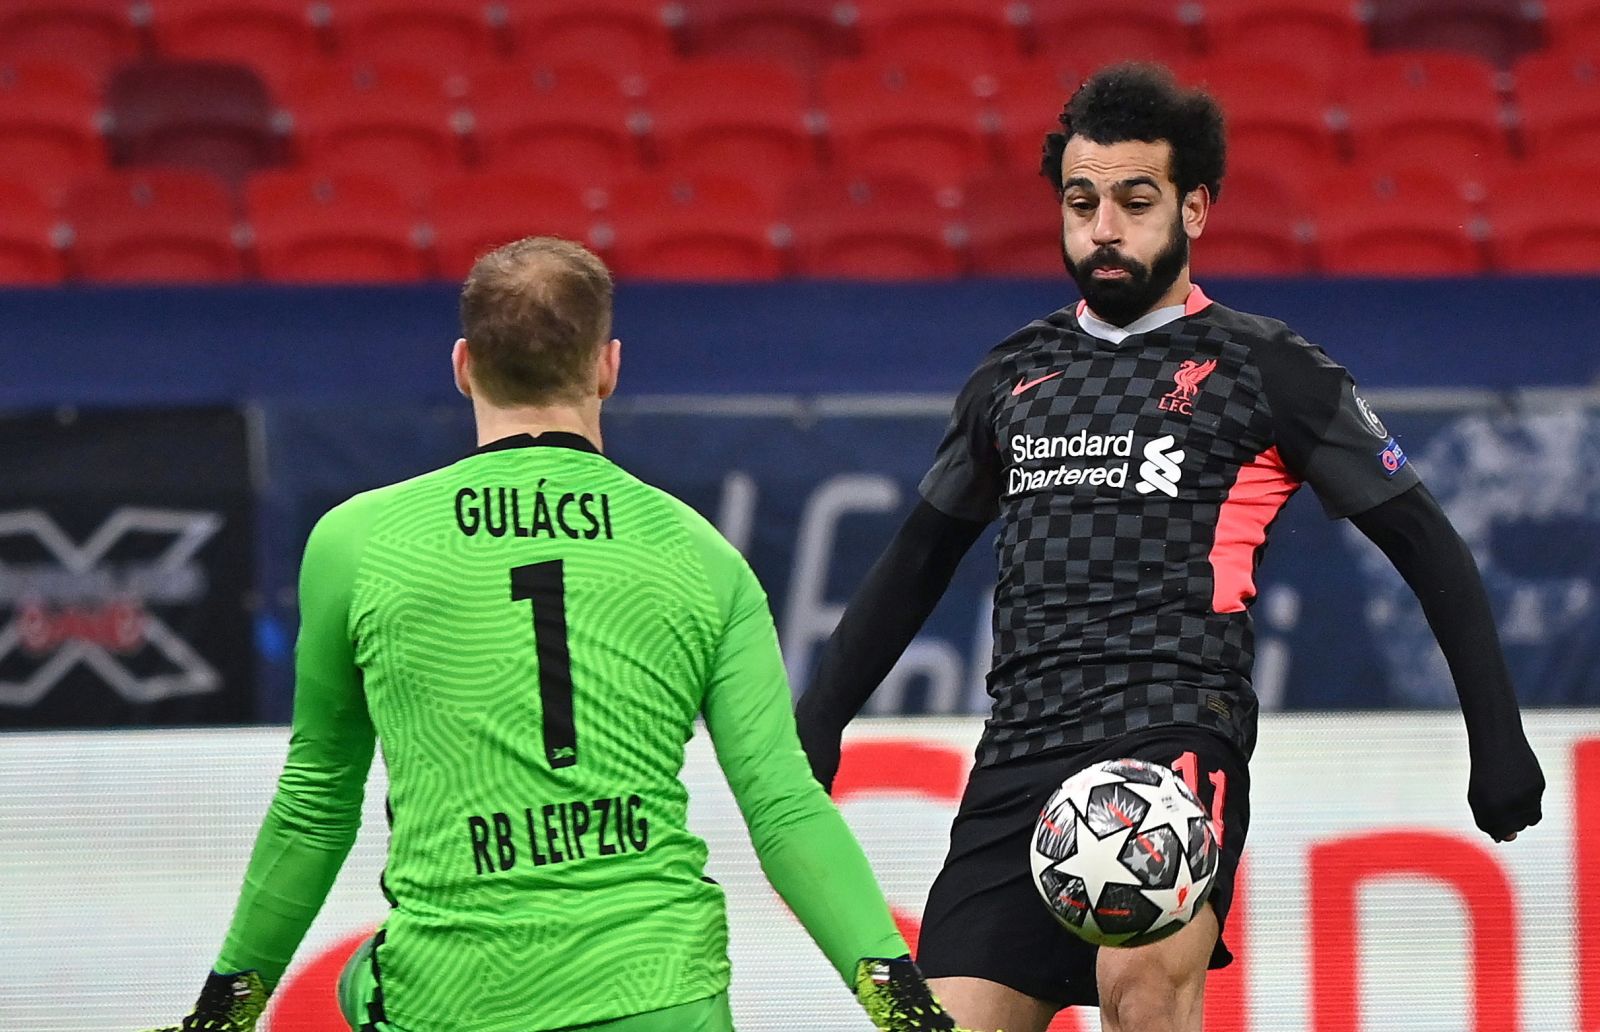 epa09017048 Hungarian goalkeeper Peter Gulacsi (L) of RB Leipzig in action against Mohamed Salah of FC Liverpool during the UEFA Champions League round of 16, first leg, soccer match between RB Leipzig and Liverpool in the Puskas Ferenc Arena in Budapest, Hungary, 16 February 2021.  EPA/TIBOR ILLYES HUNGARY OUT